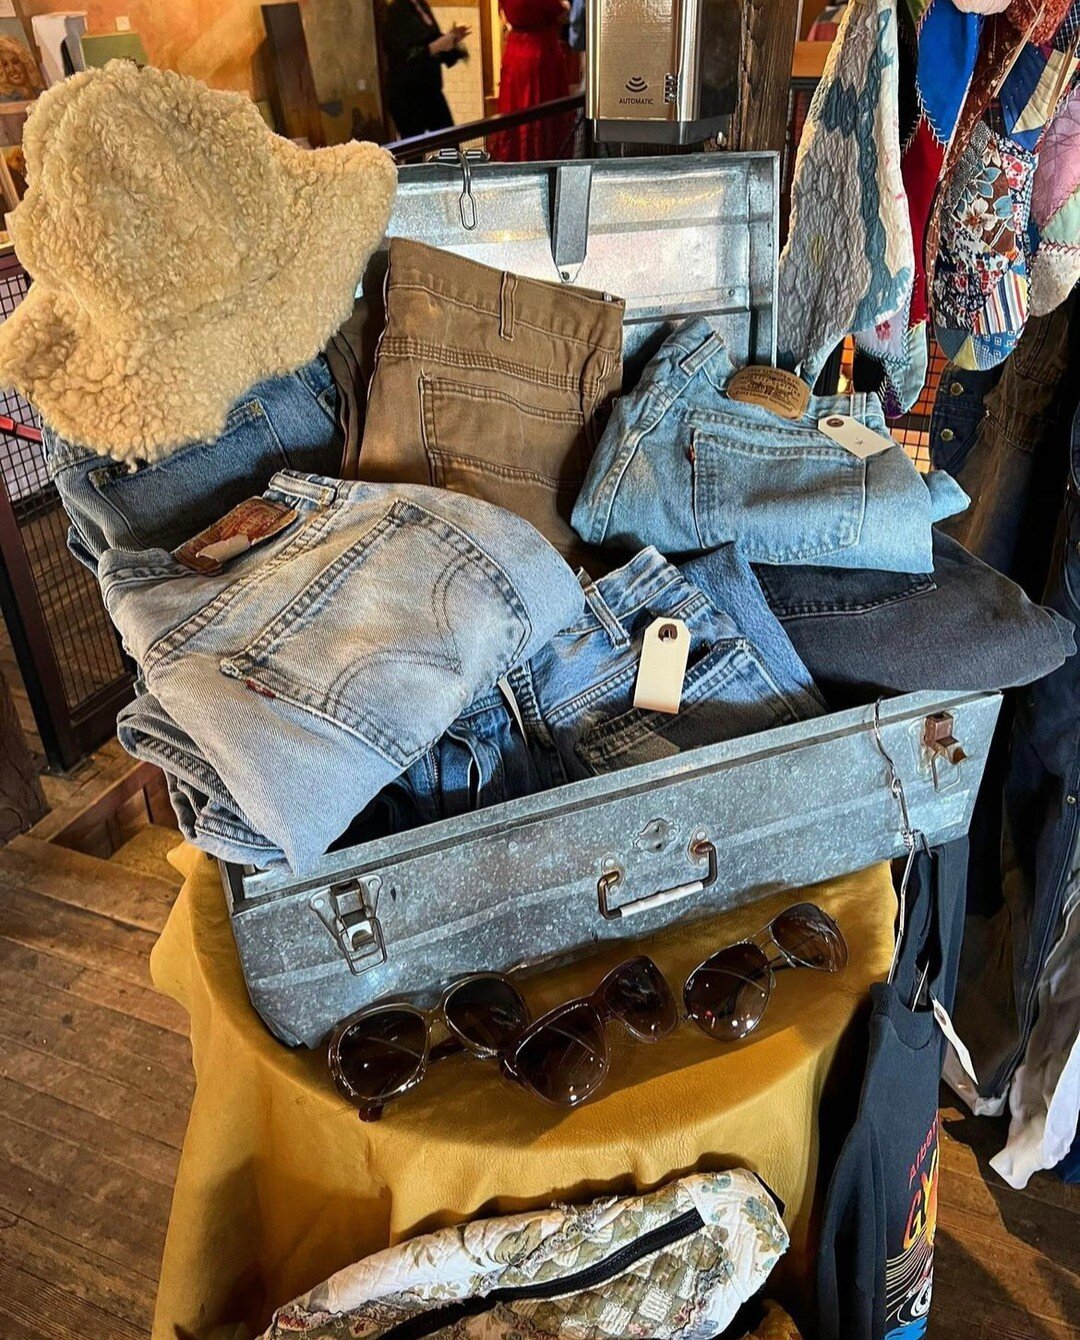 Is your Stampede wardrobe lookin' more City Slicker than Sweetheart of the Rodeo? We're here to help! 

From fringe and feathers to fabulous vintage leathers, @thehonkytonkmarket is setting up shop with free entry at The Saloon Season Pop-Up and Stag